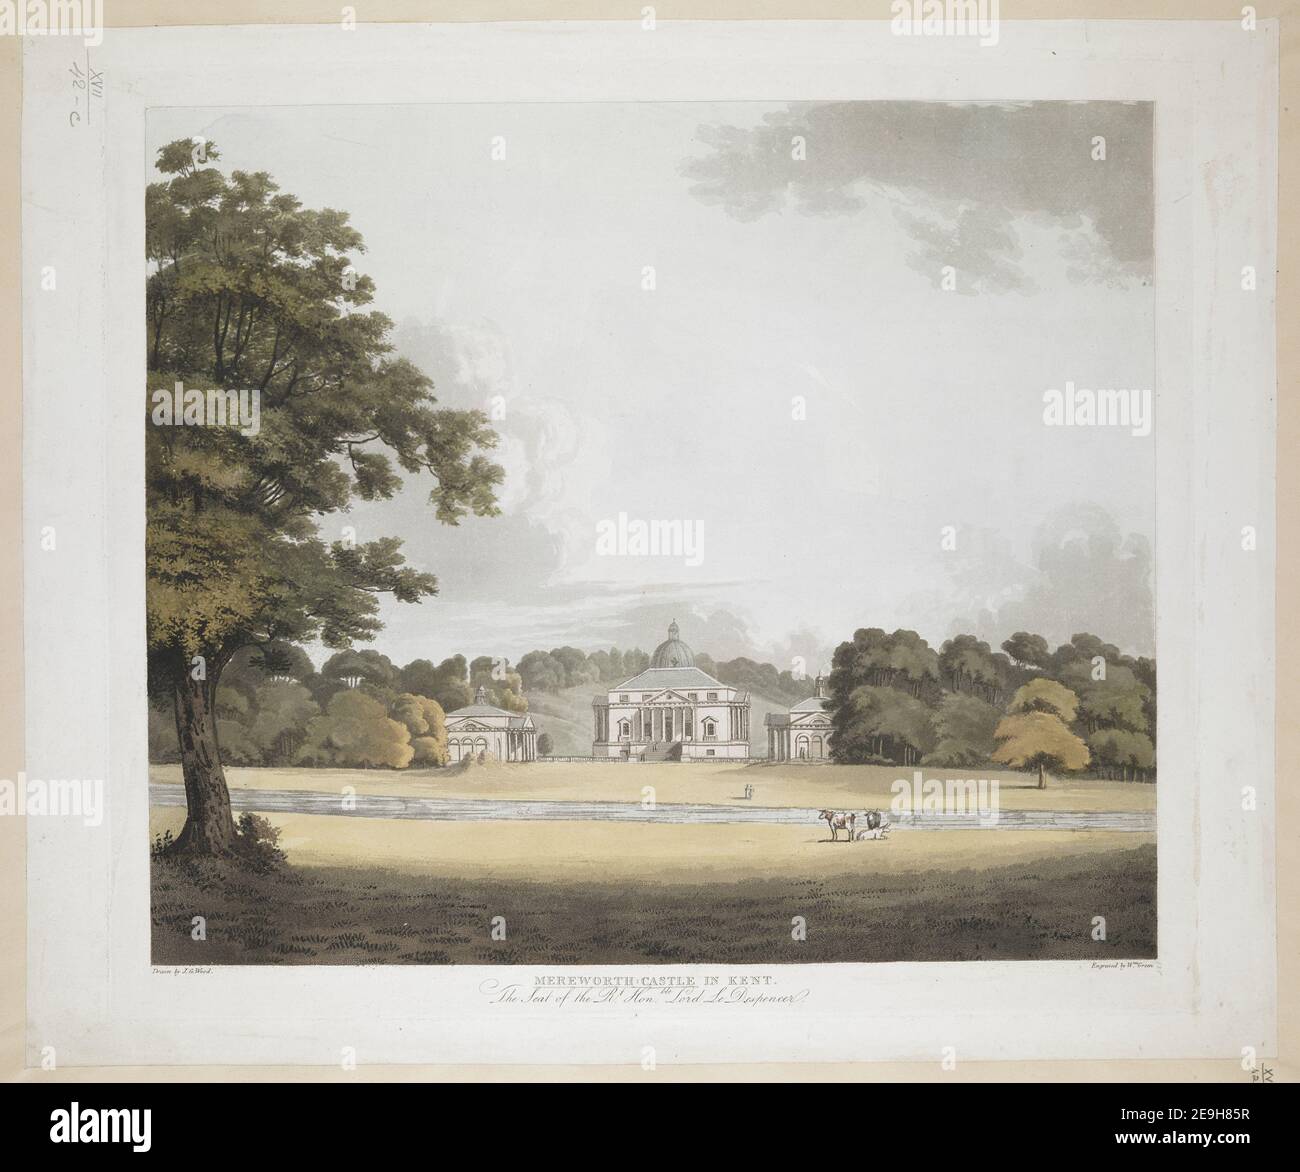 MEREWORTH CASTLE IN KENT  Author  Green, William 17.42.c. Place of publication: [England] Publisher: [George Wood] Date of publication: [1800]  Item type: 1 print Medium: aquatint and etching with hand-colouring Dimensions: platemark 38.3 x 43.8 cm, on sheet 41.7 x 50.4 cm  Former owner: George III, King of Great Britain, 1738-1820 Stock Photo